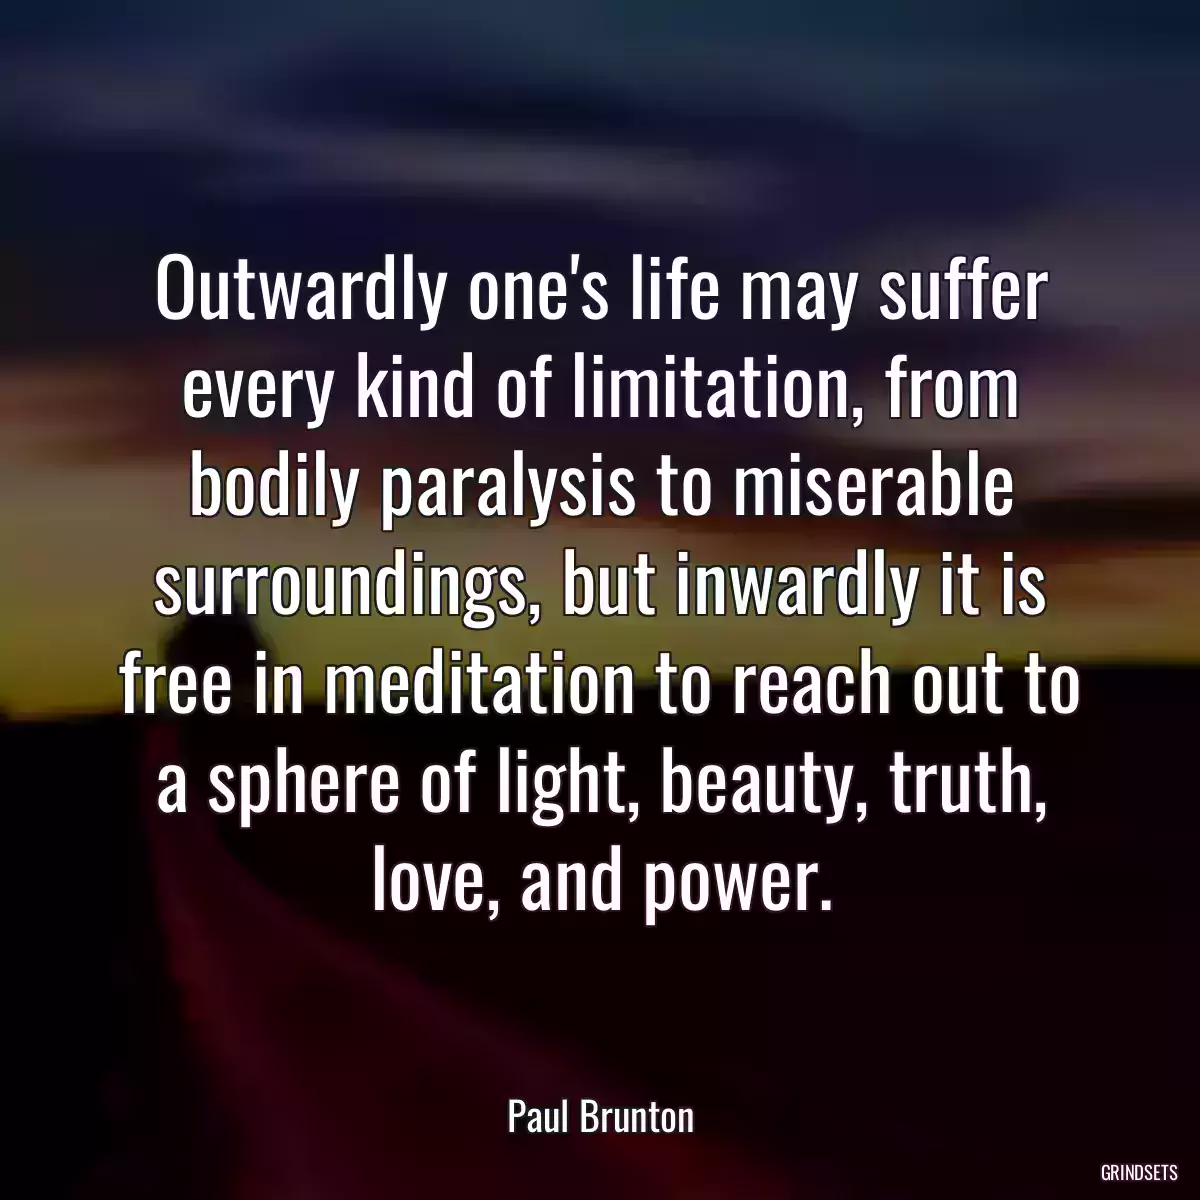 Outwardly one\'s life may suffer every kind of limitation, from bodily paralysis to miserable surroundings, but inwardly it is free in meditation to reach out to a sphere of light, beauty, truth, love, and power.